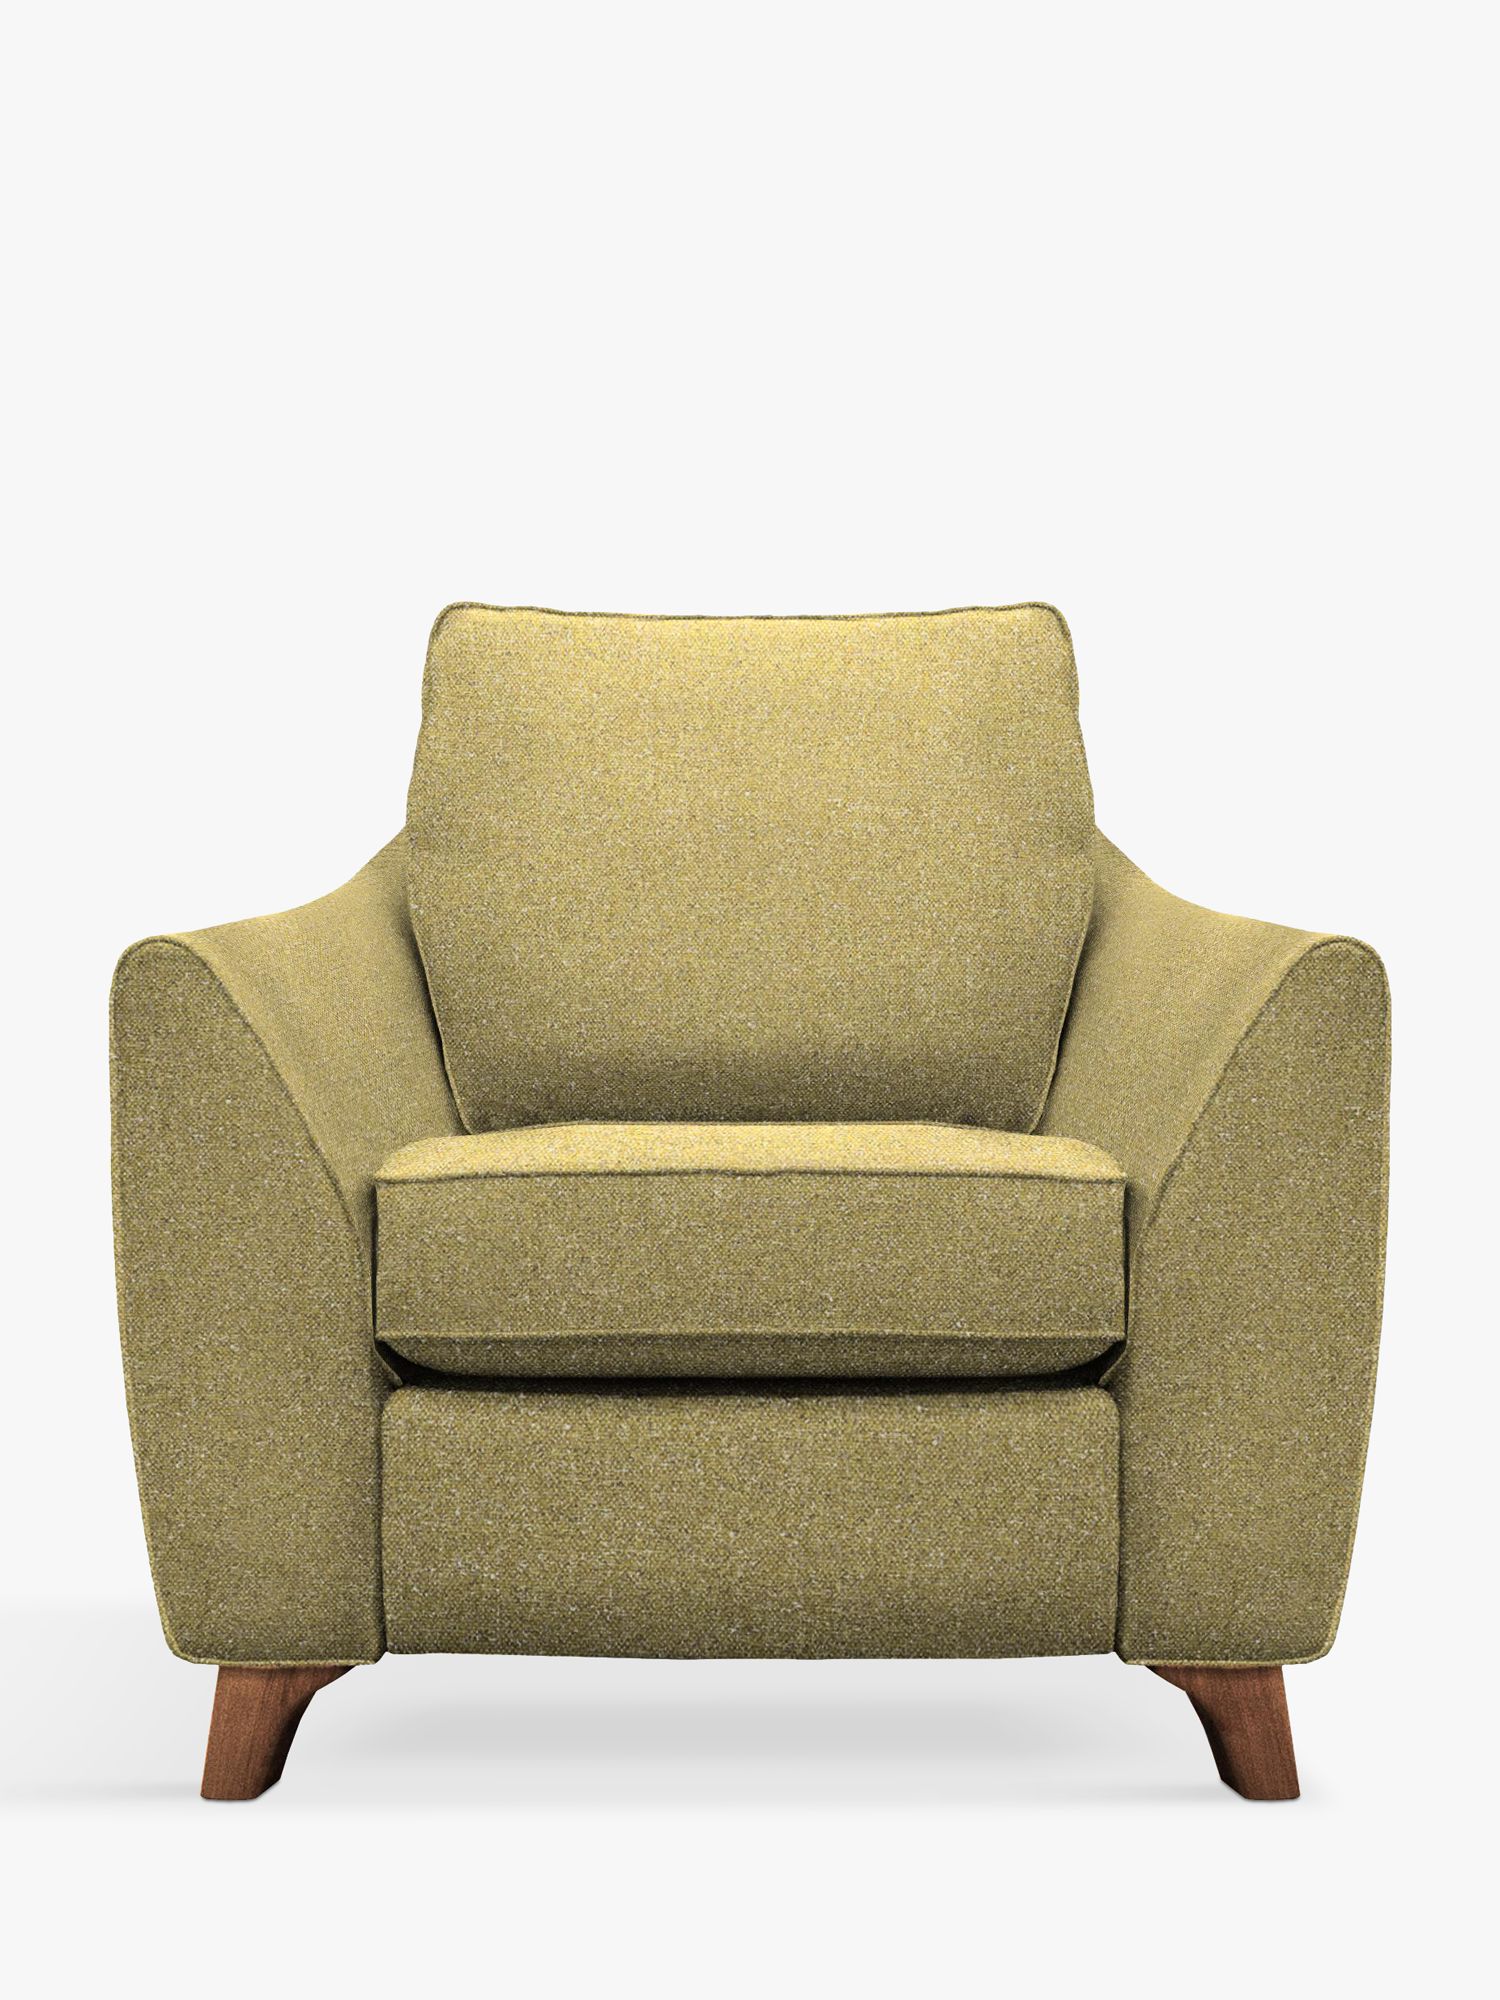 The Sixty Eight Range, G Plan Vintage The Sixty Eight Armchair, Tweed Citrus